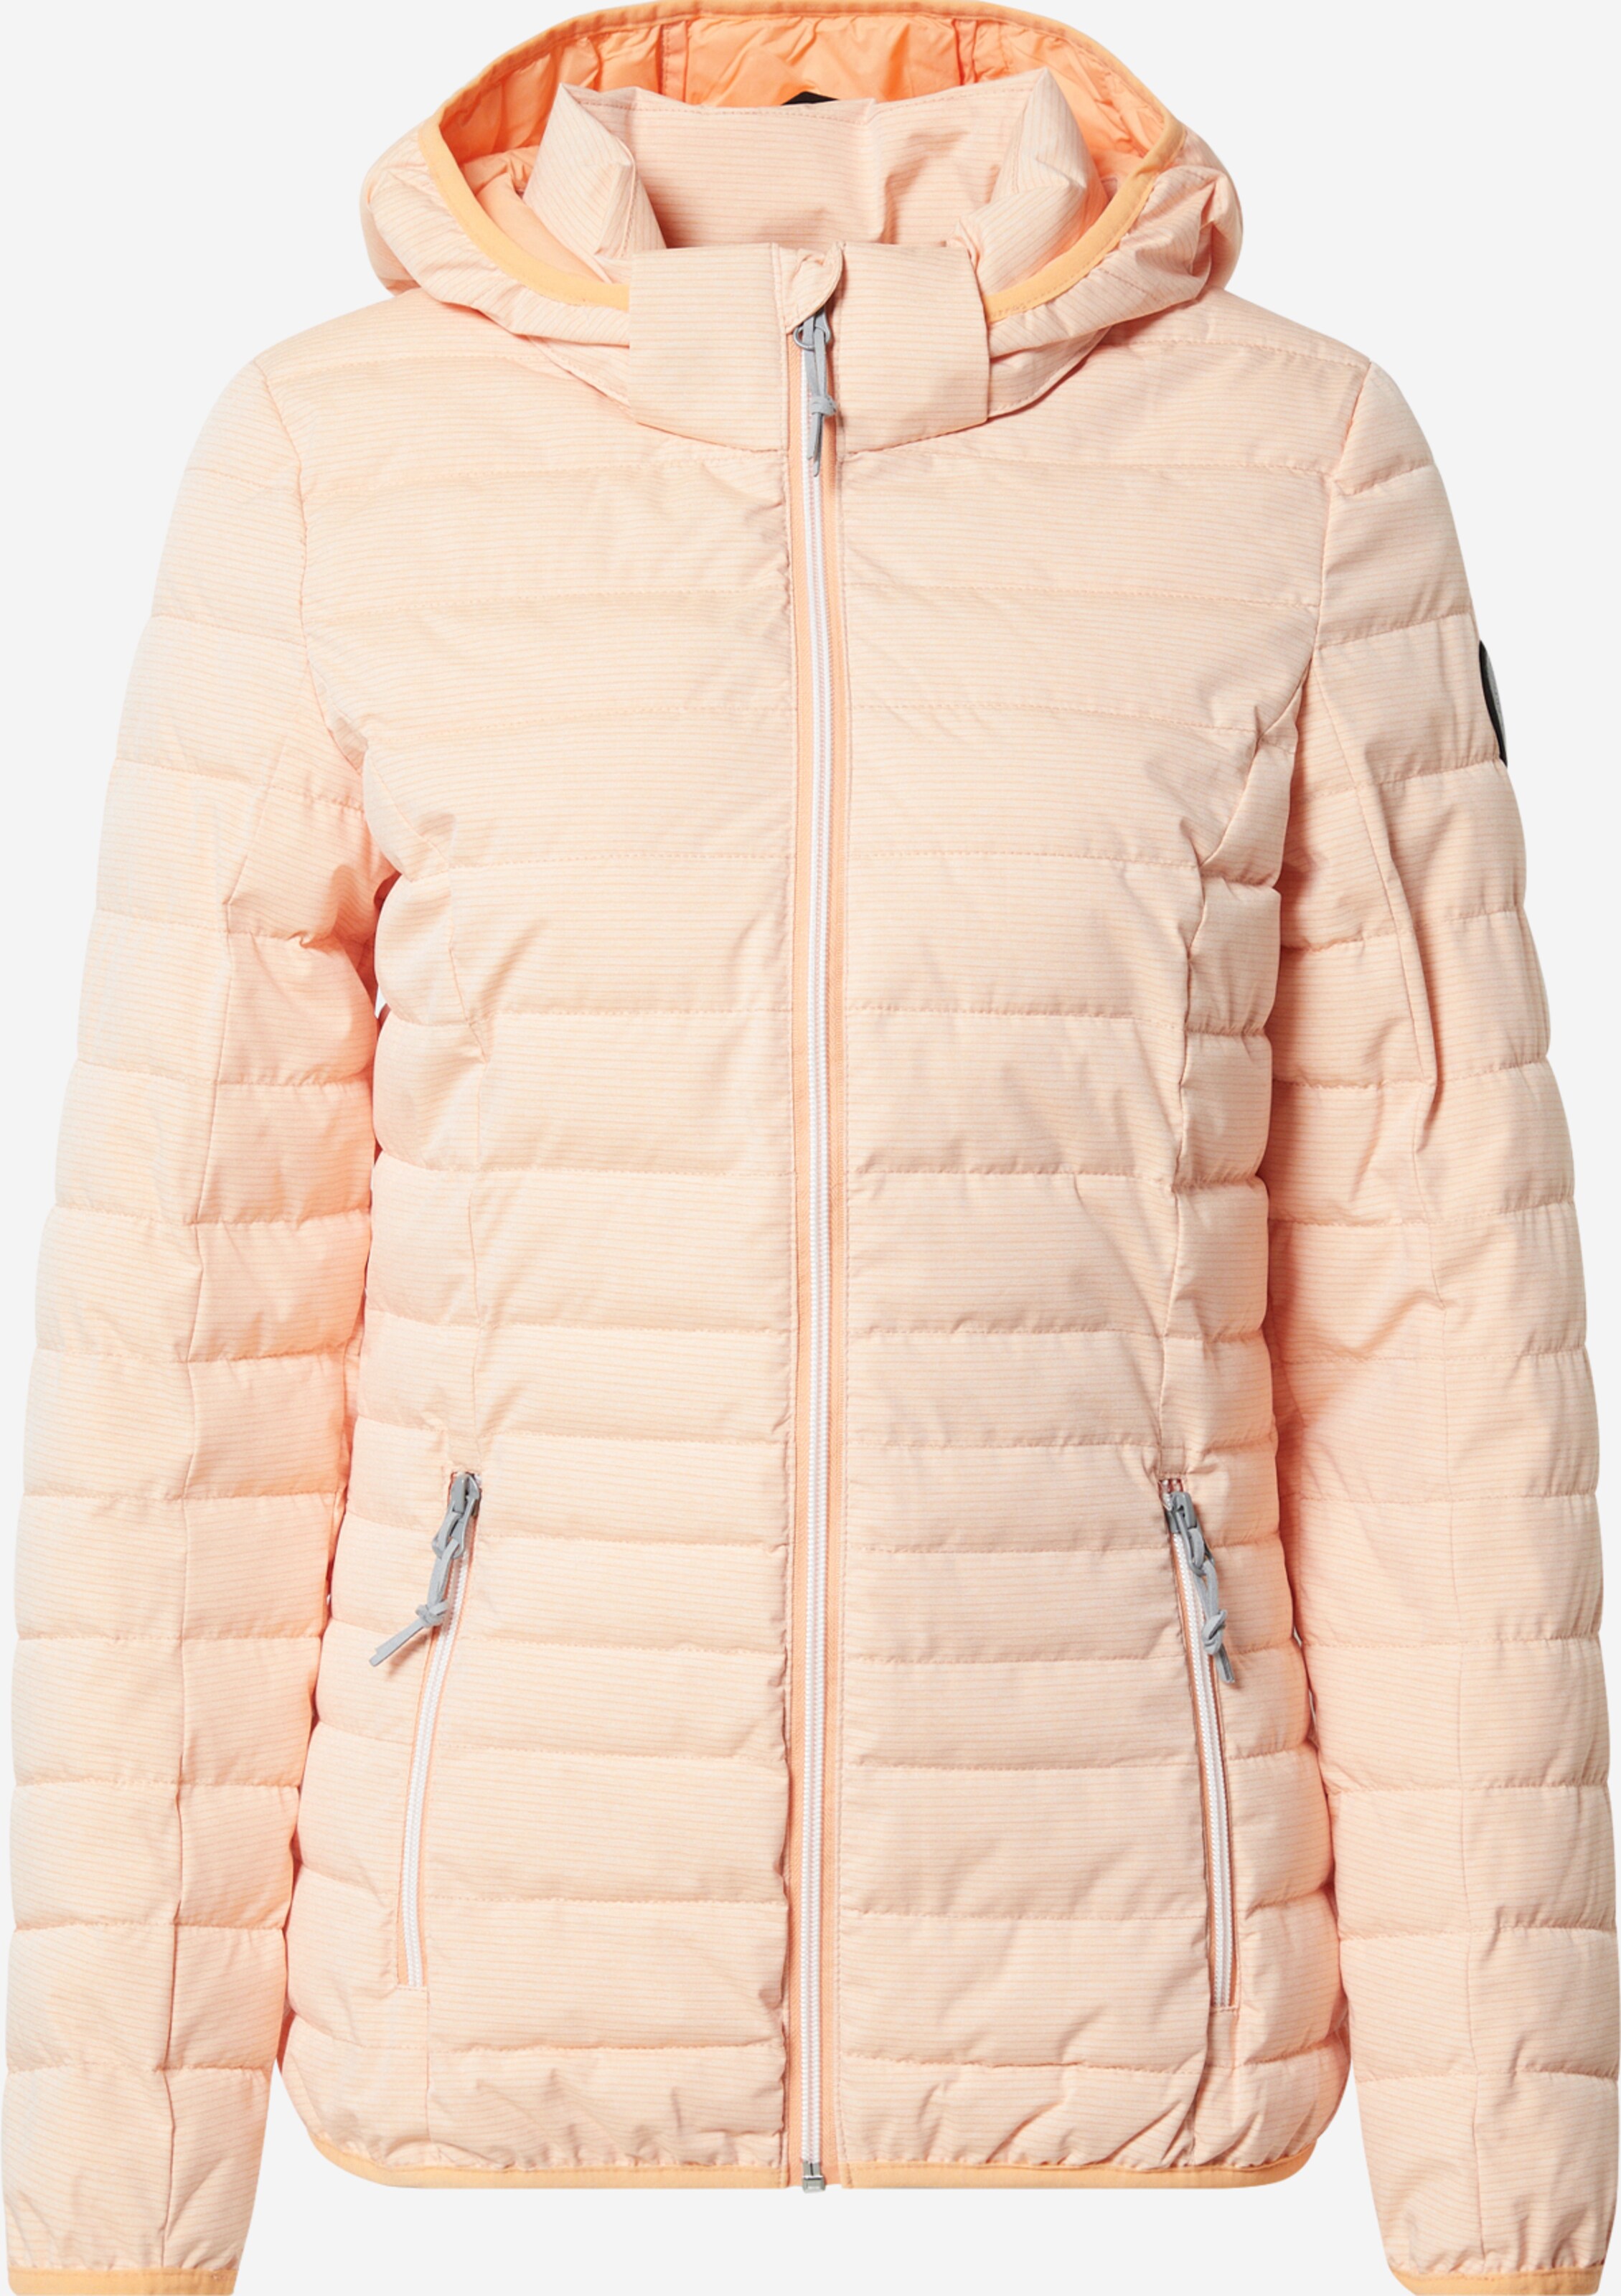 Apricot G.I.G.A. Outdoor YOU \'Uyaka\' DX in by Jacket killtec | ABOUT